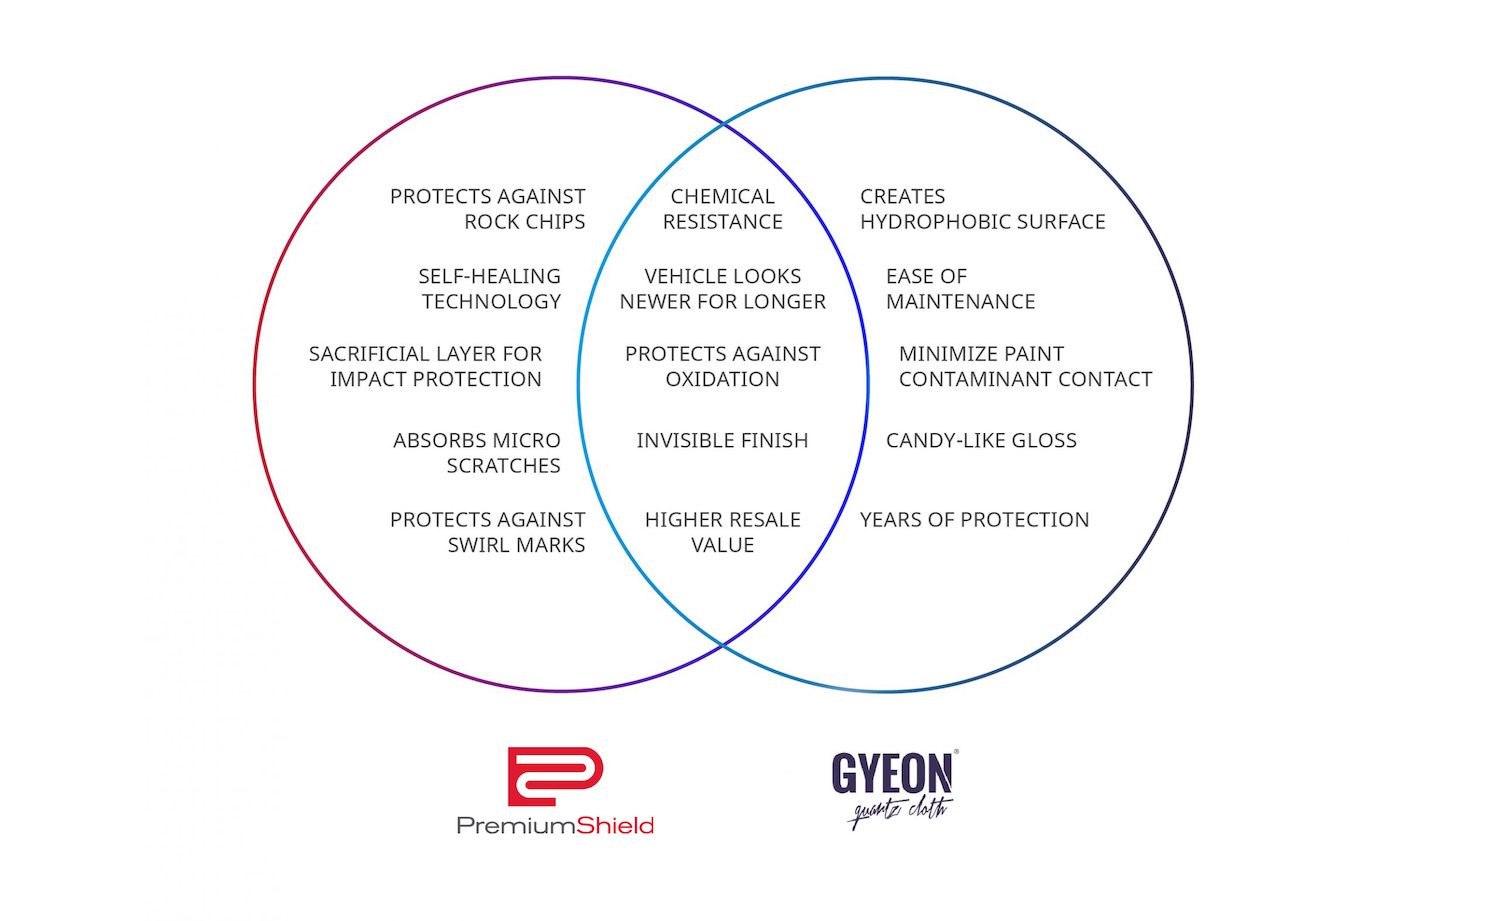 Venn diagram showing overlapping benefits of premium shield paint protection film and Gyeon ceramic coatings